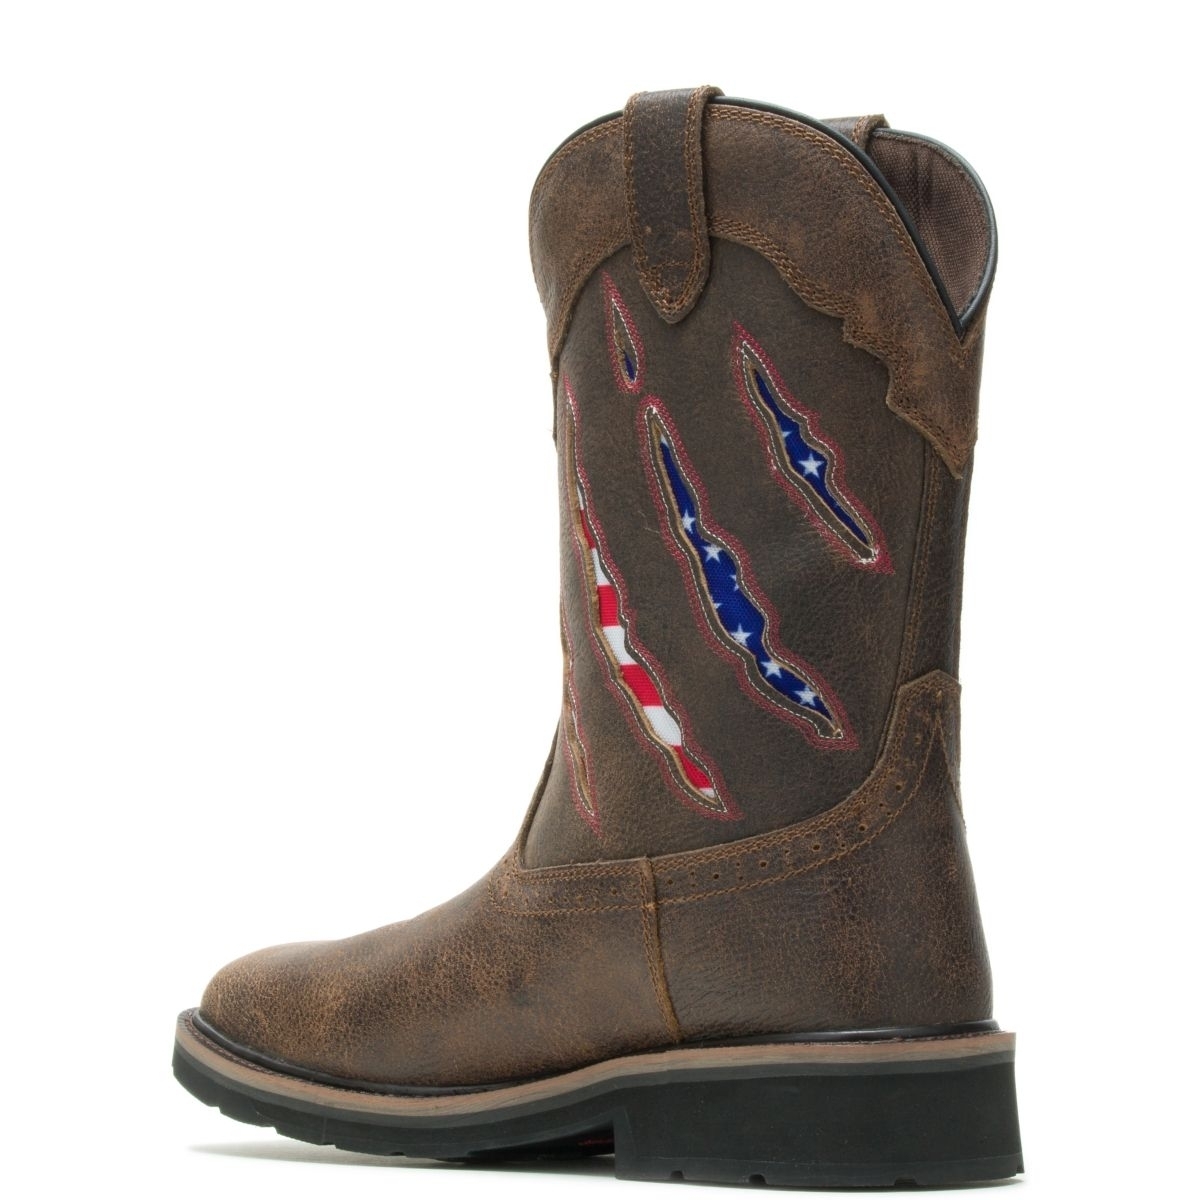 WOLVERINE Men's Rancher Claw Wellington Soft Toe Work Boot Brown/Flag - W200138 Flag/brown - Flag/brown, 9.5 X-Wide